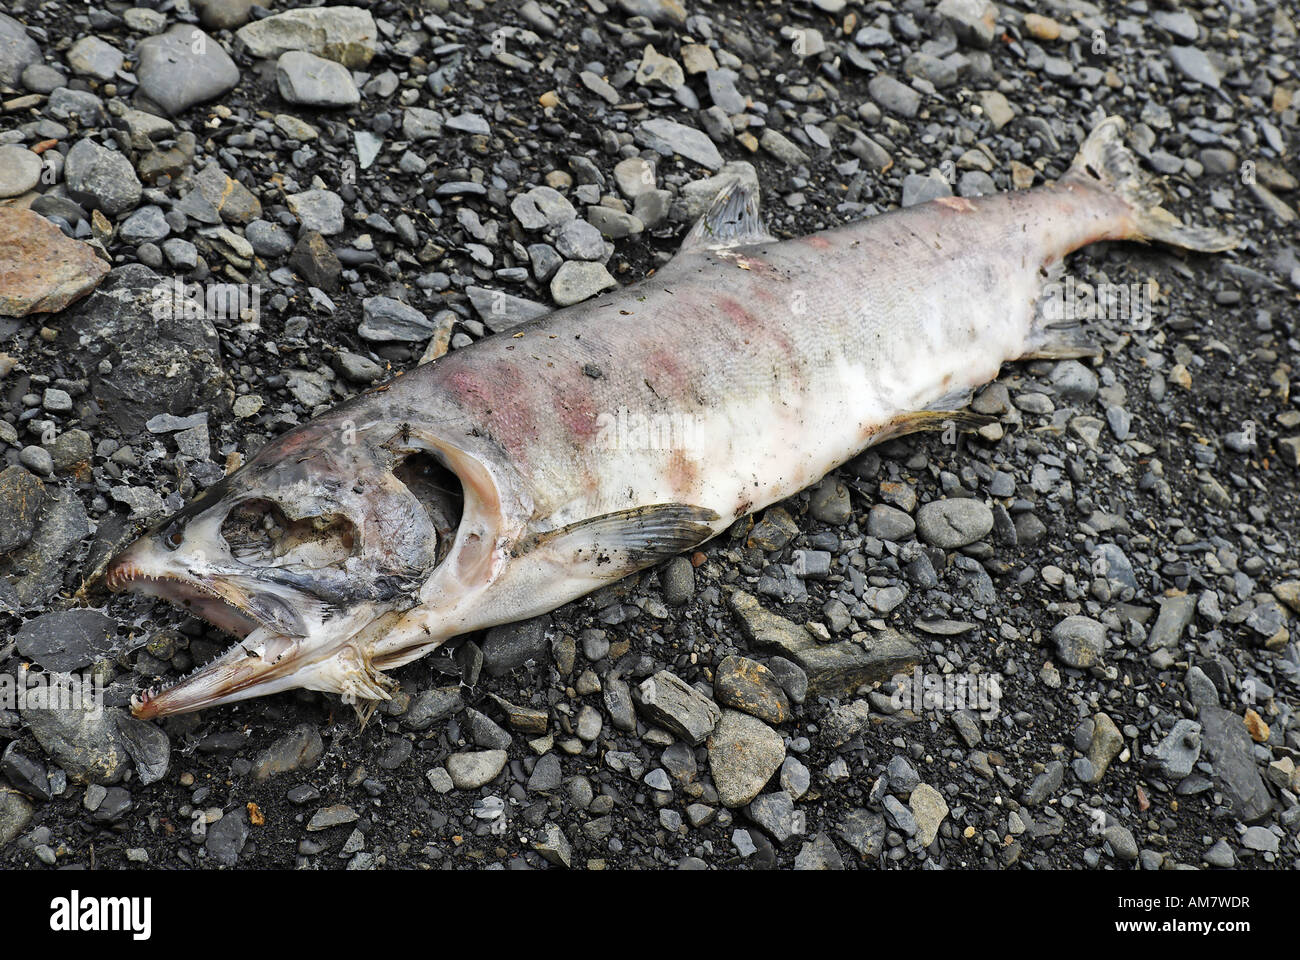 Pacific salmon, died after spawning, Alaska, USA Stock Photo